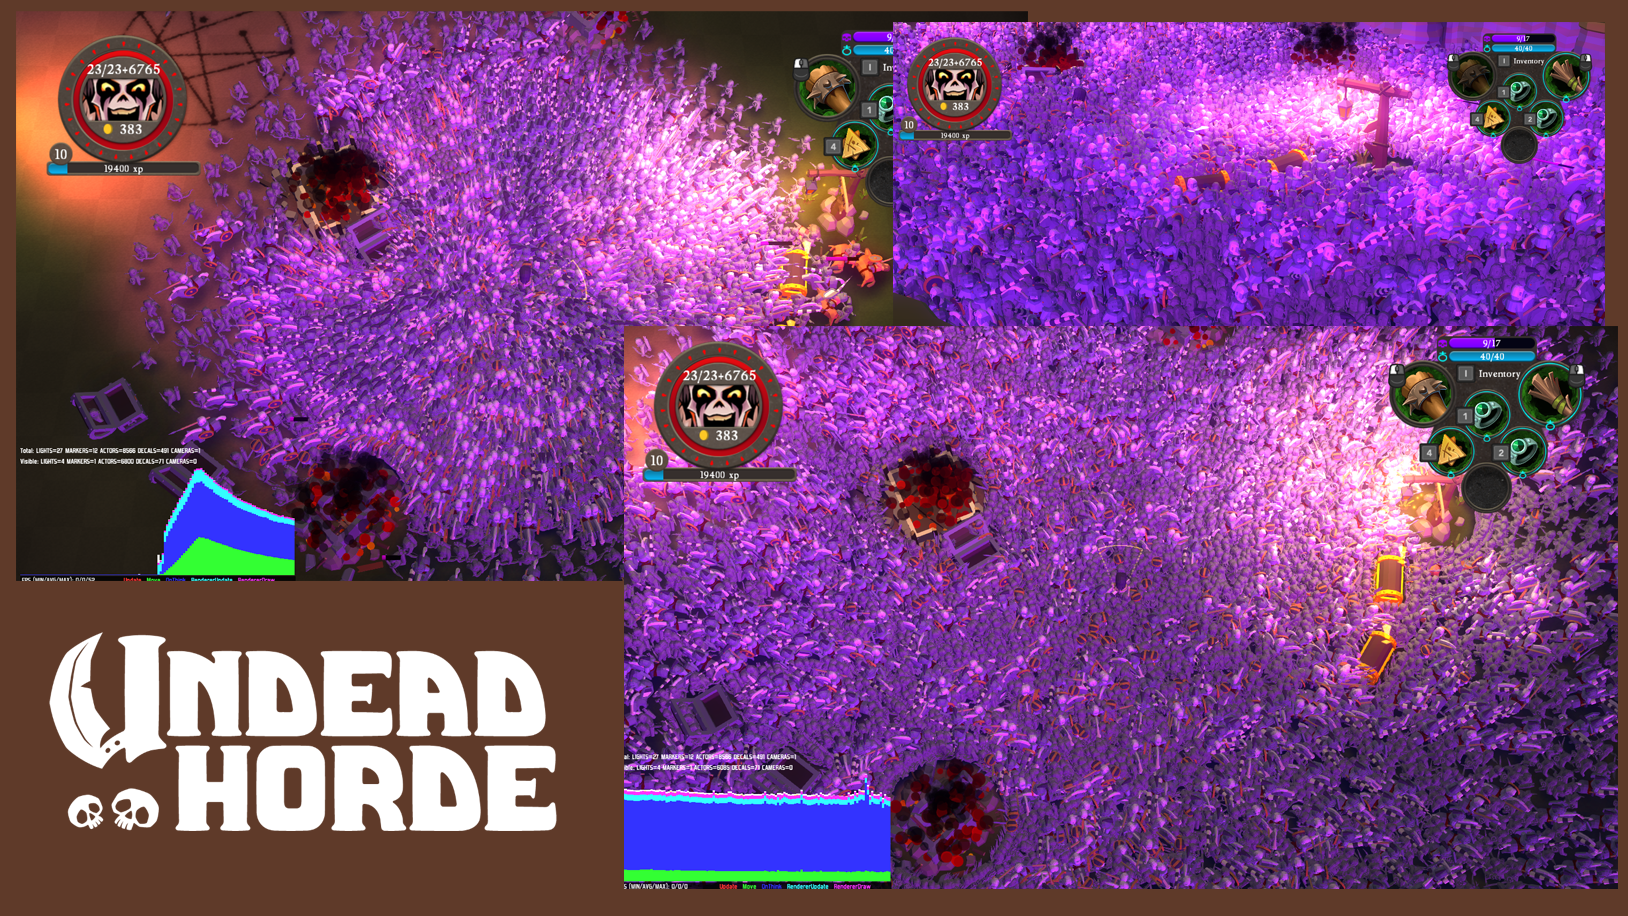 download the new Undead Horde